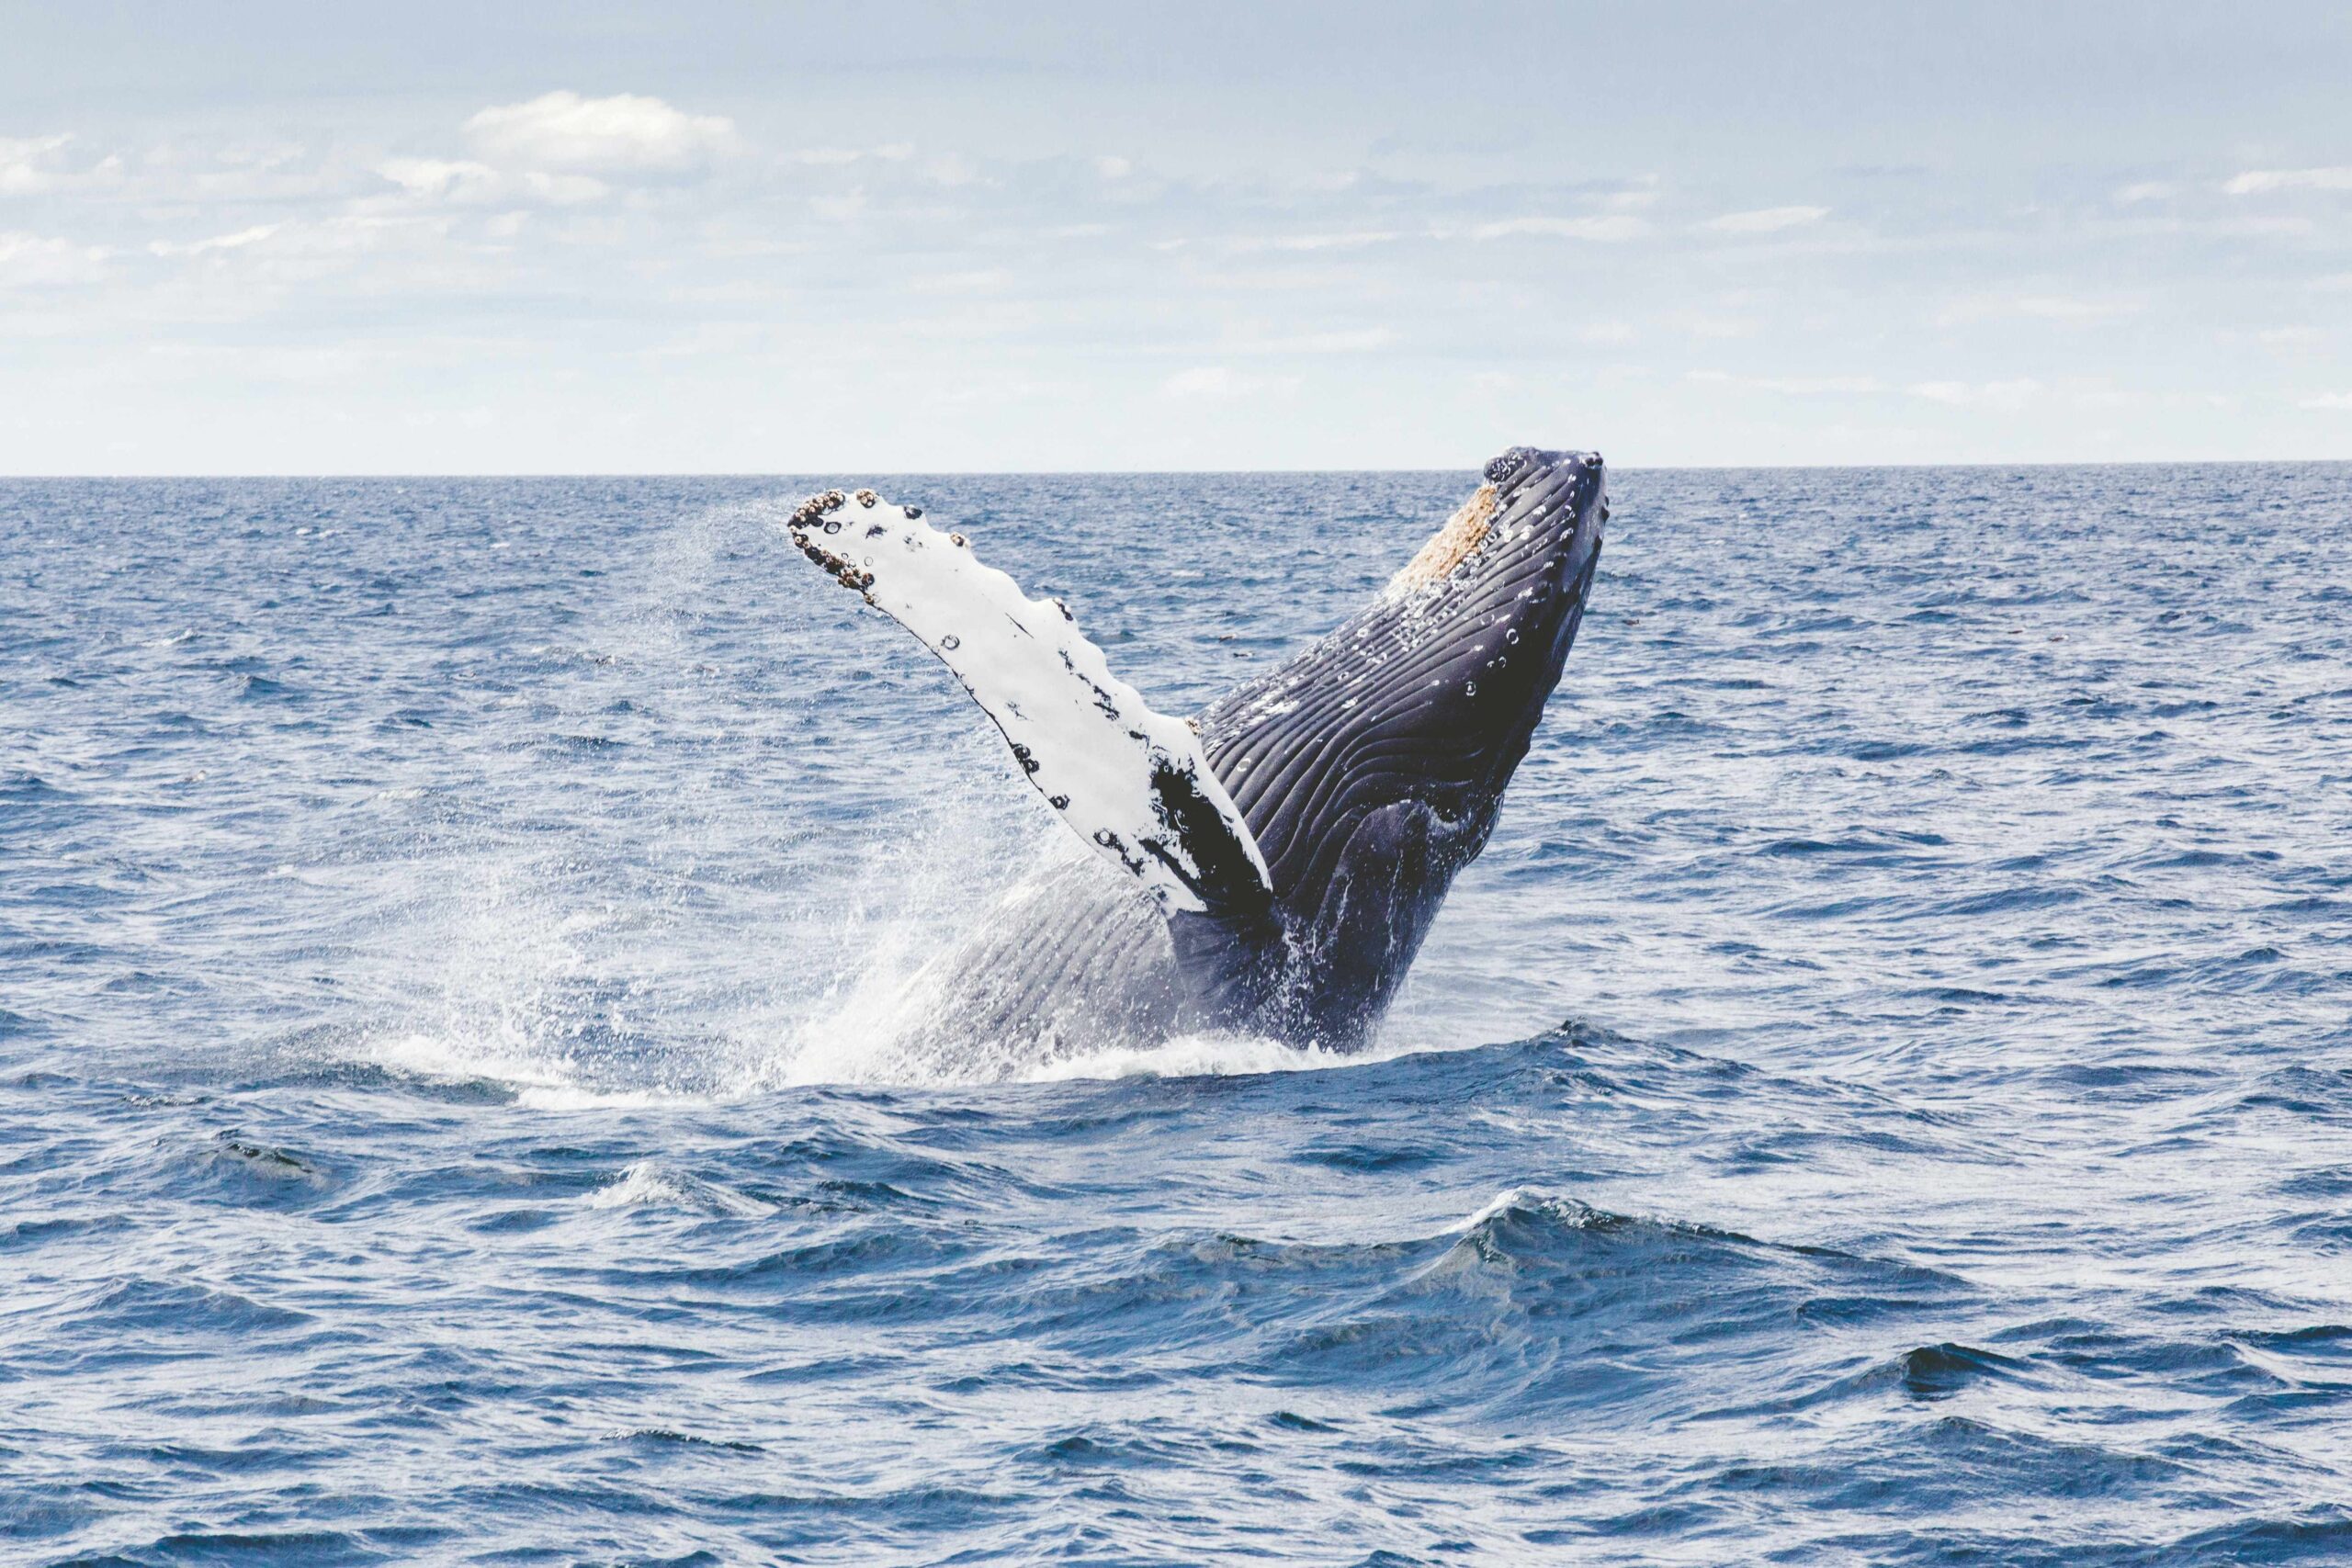 A Humpback Whale jumping out of the water